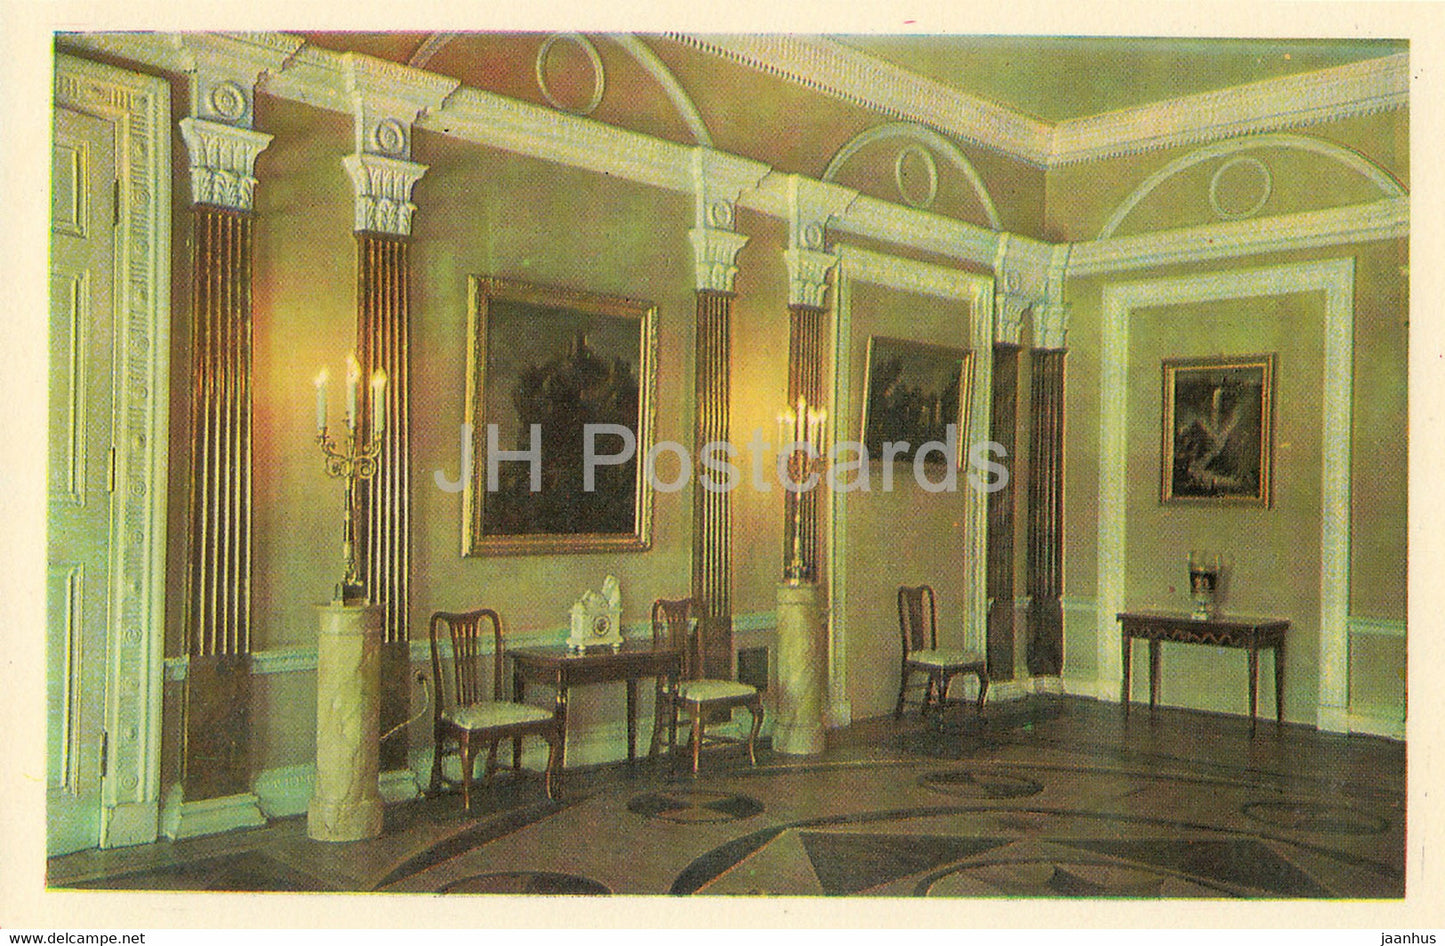 Town of Pushkin - Great (Yekaterinsky) Palace - Waiters quarters - 1971 - Russia USSR - unused - JH Postcards